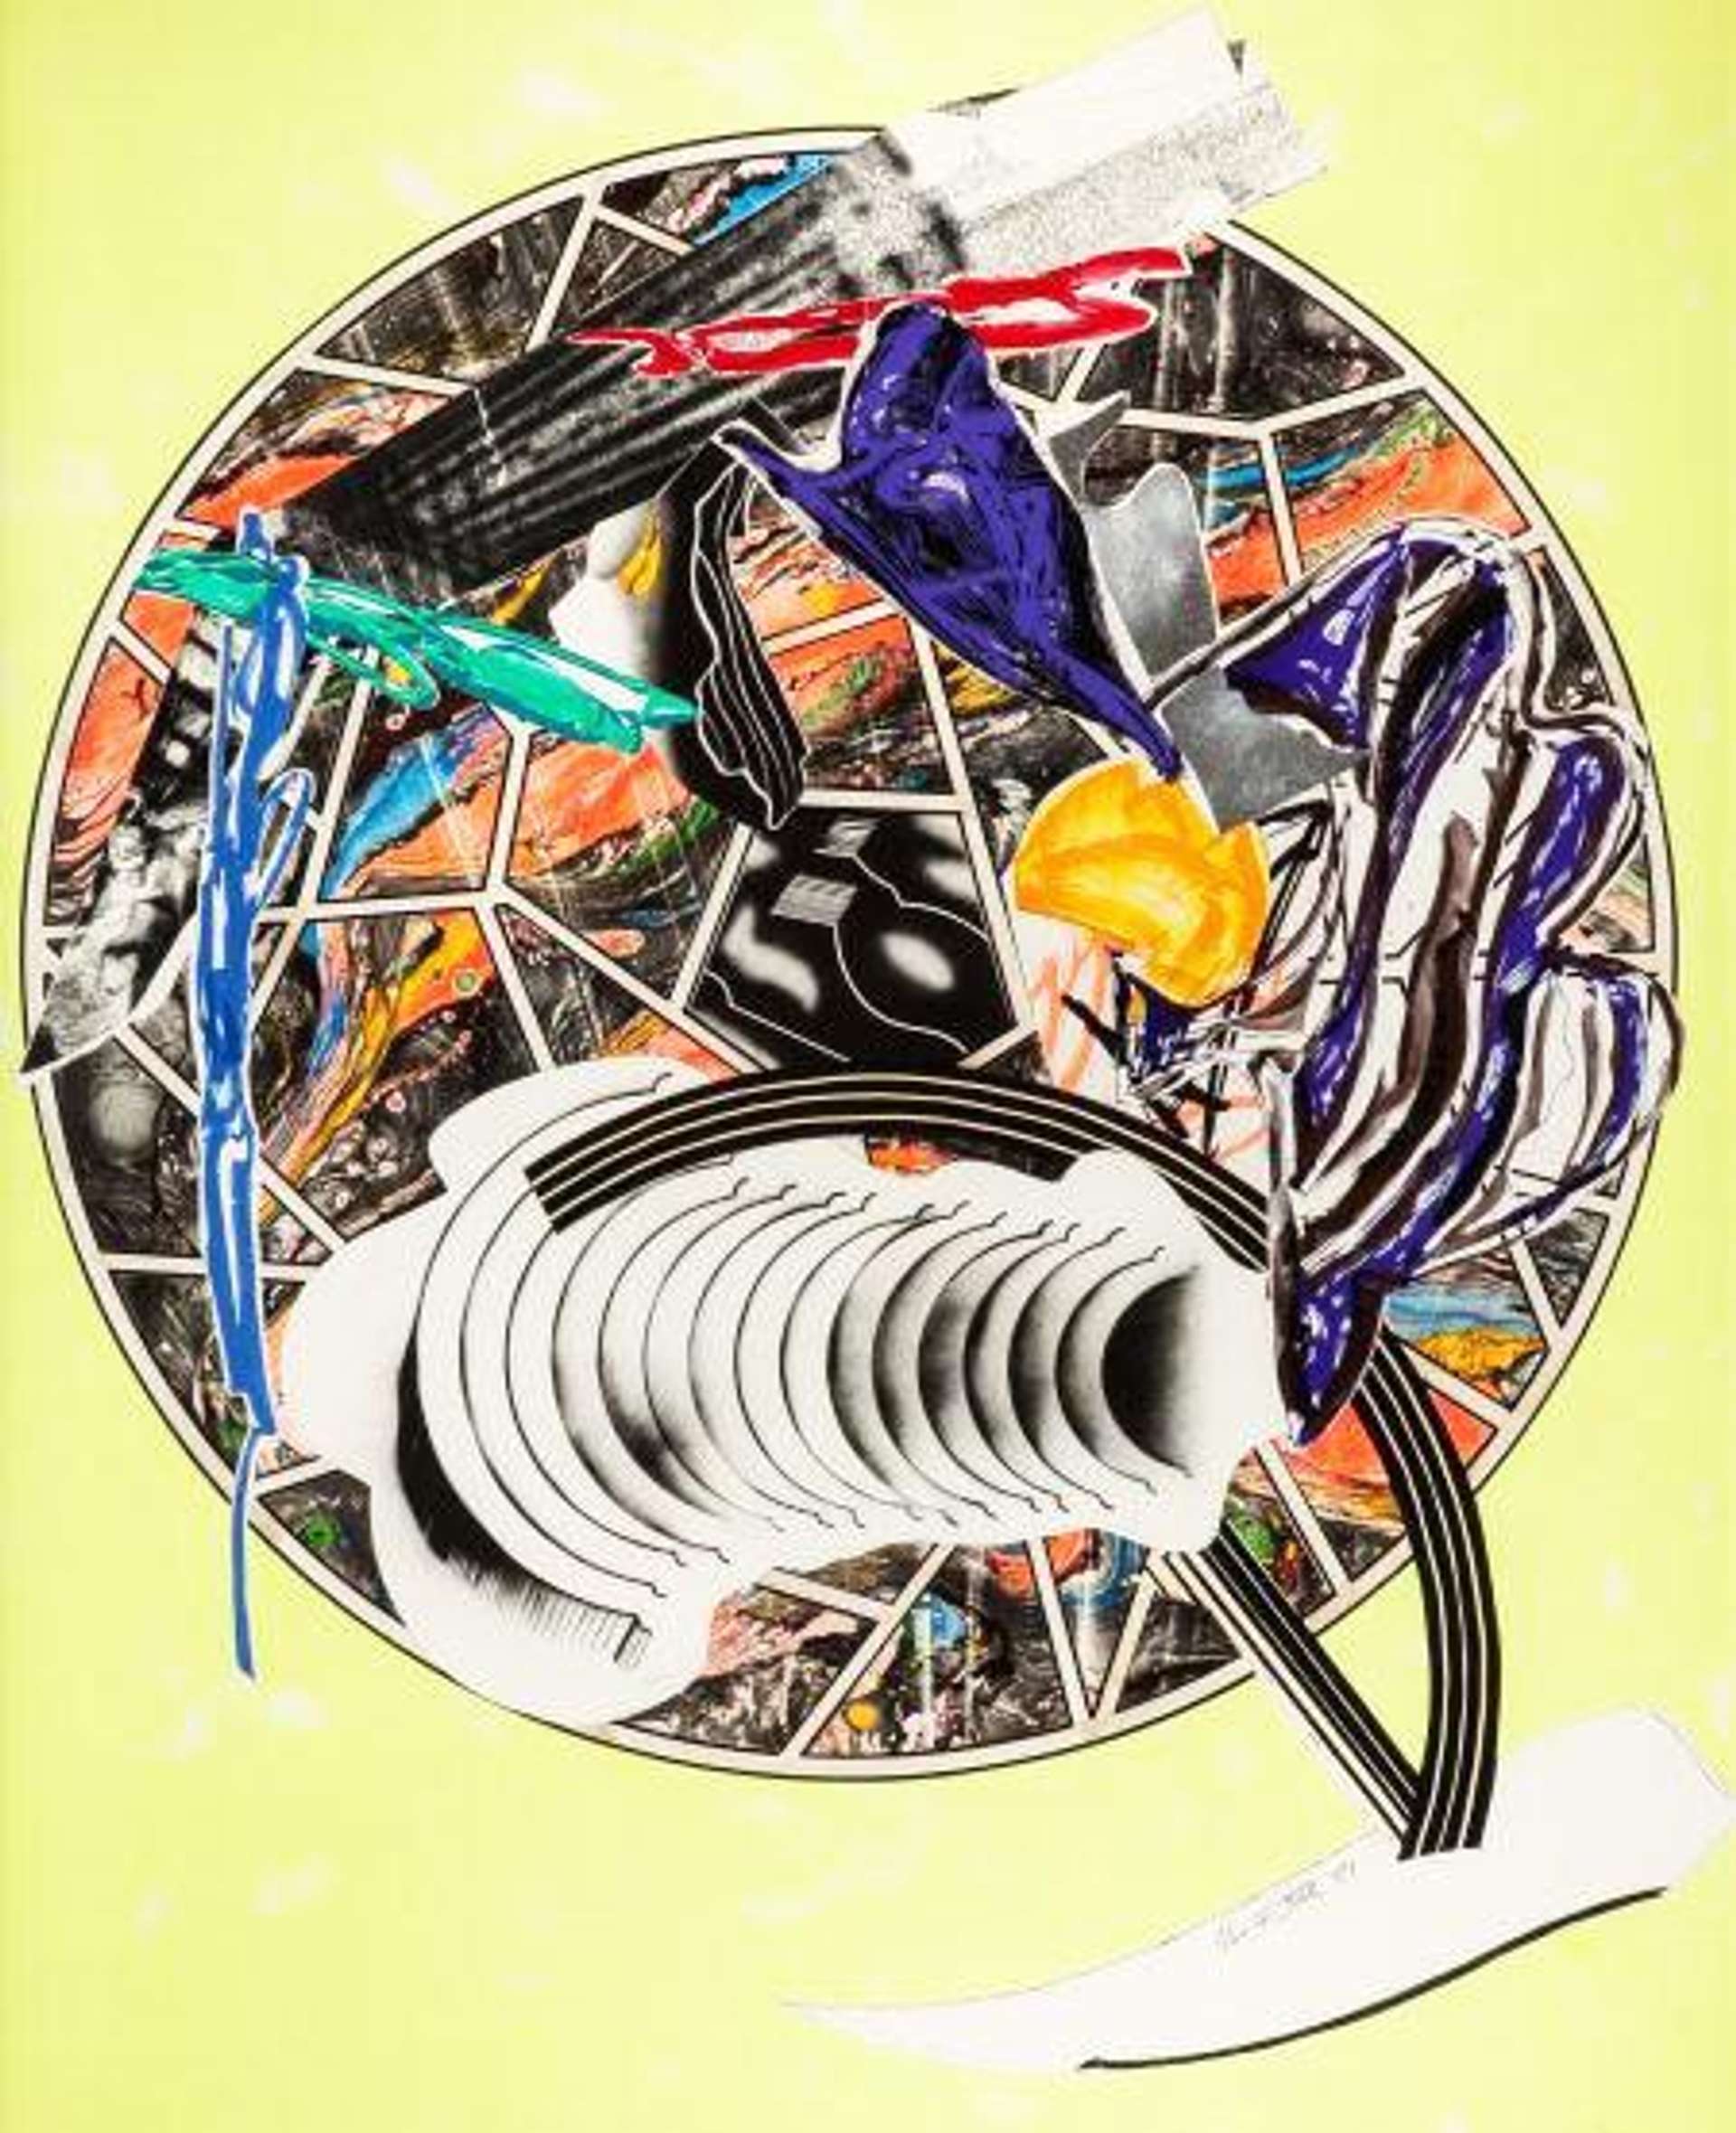 Frank Stella: The Whale As A Dish - Signed Print